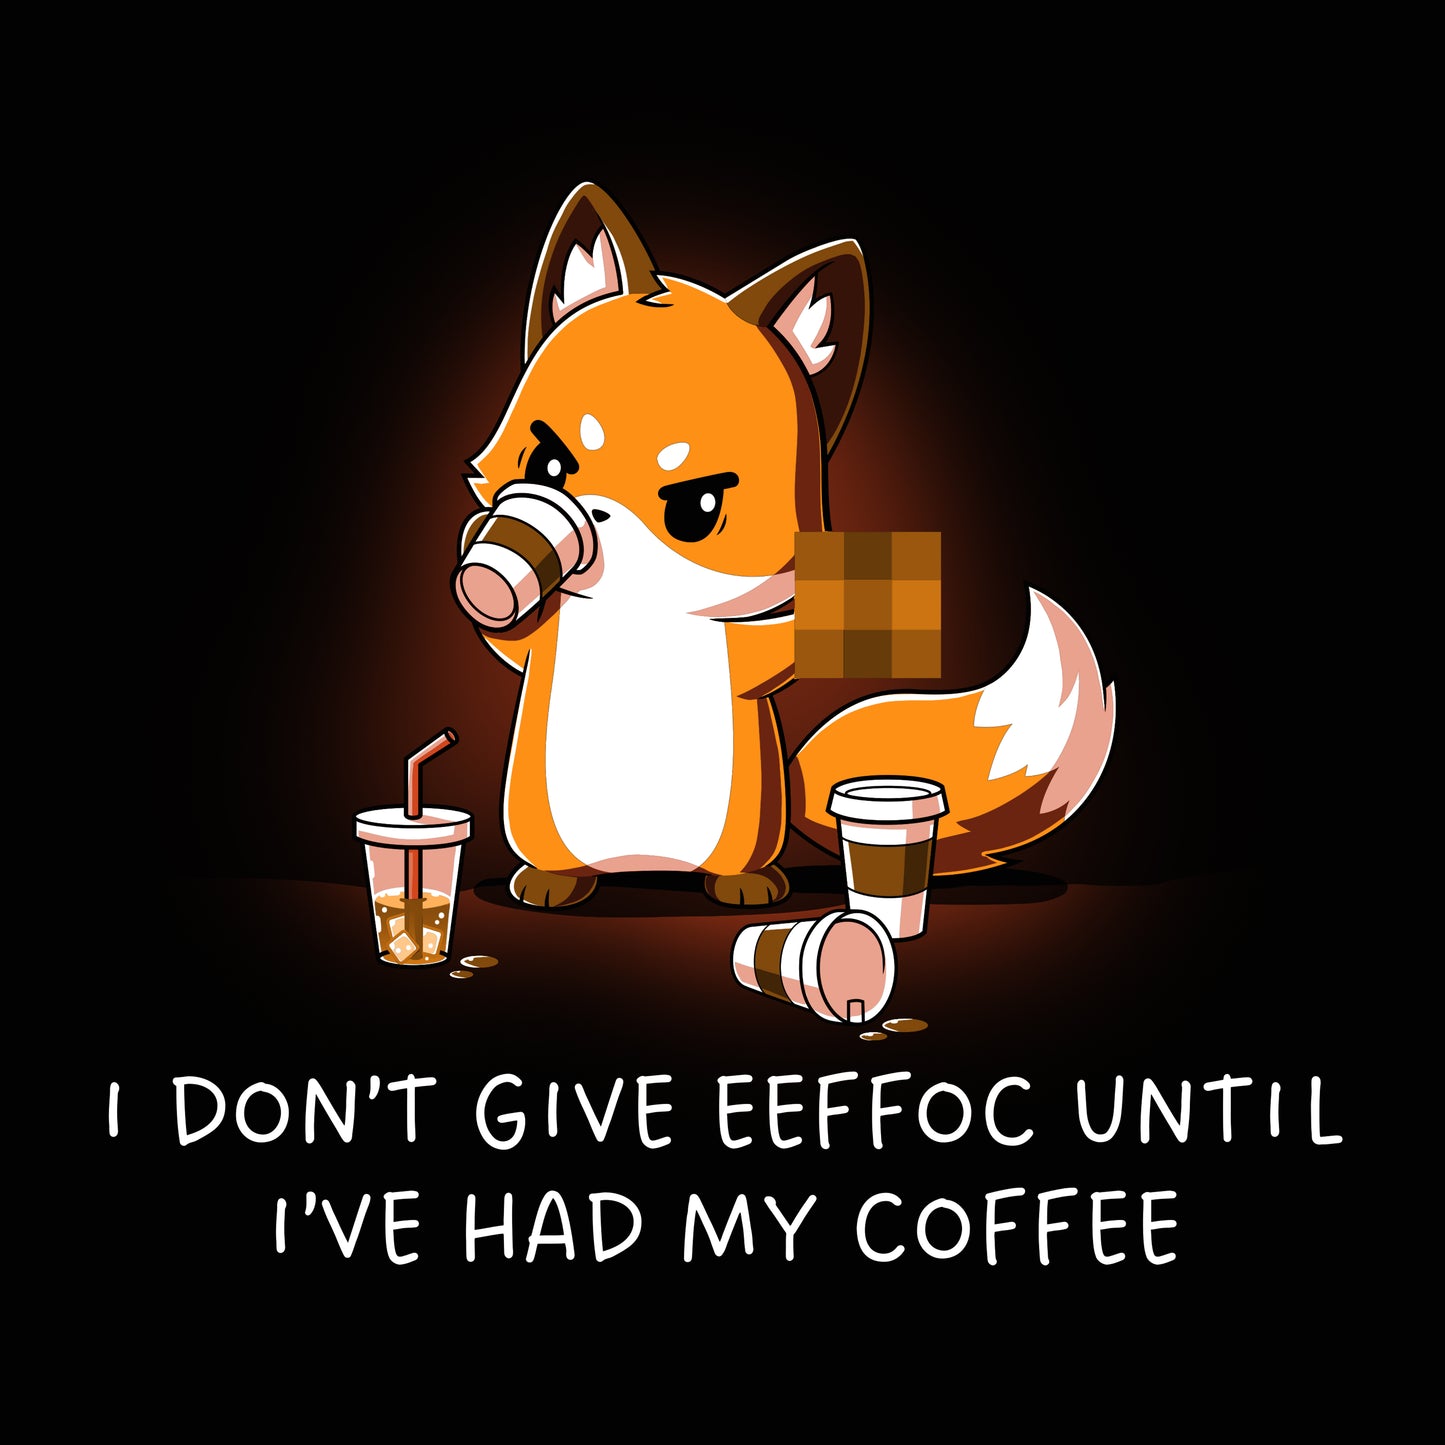 A Don't Give Eeffoc cartoon fox holding TeeTurtle coffee cups, perfect for coffee lovers and those who enjoy a cozy coffee time.